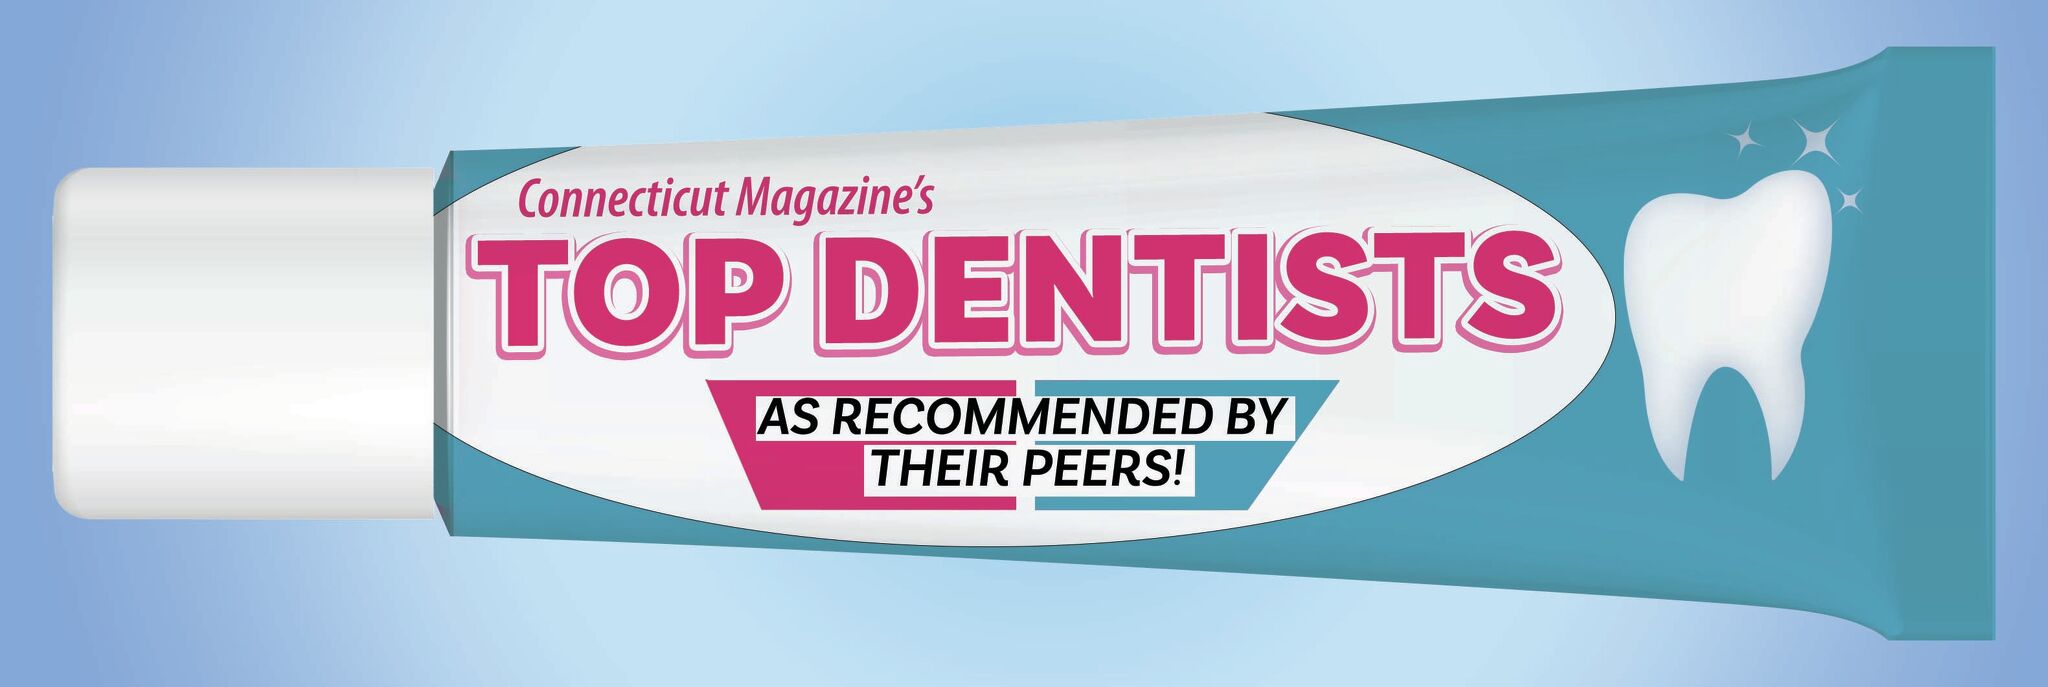 Connecticut Magazine's Top Dentists 2022 439 dentists in 7 specialties